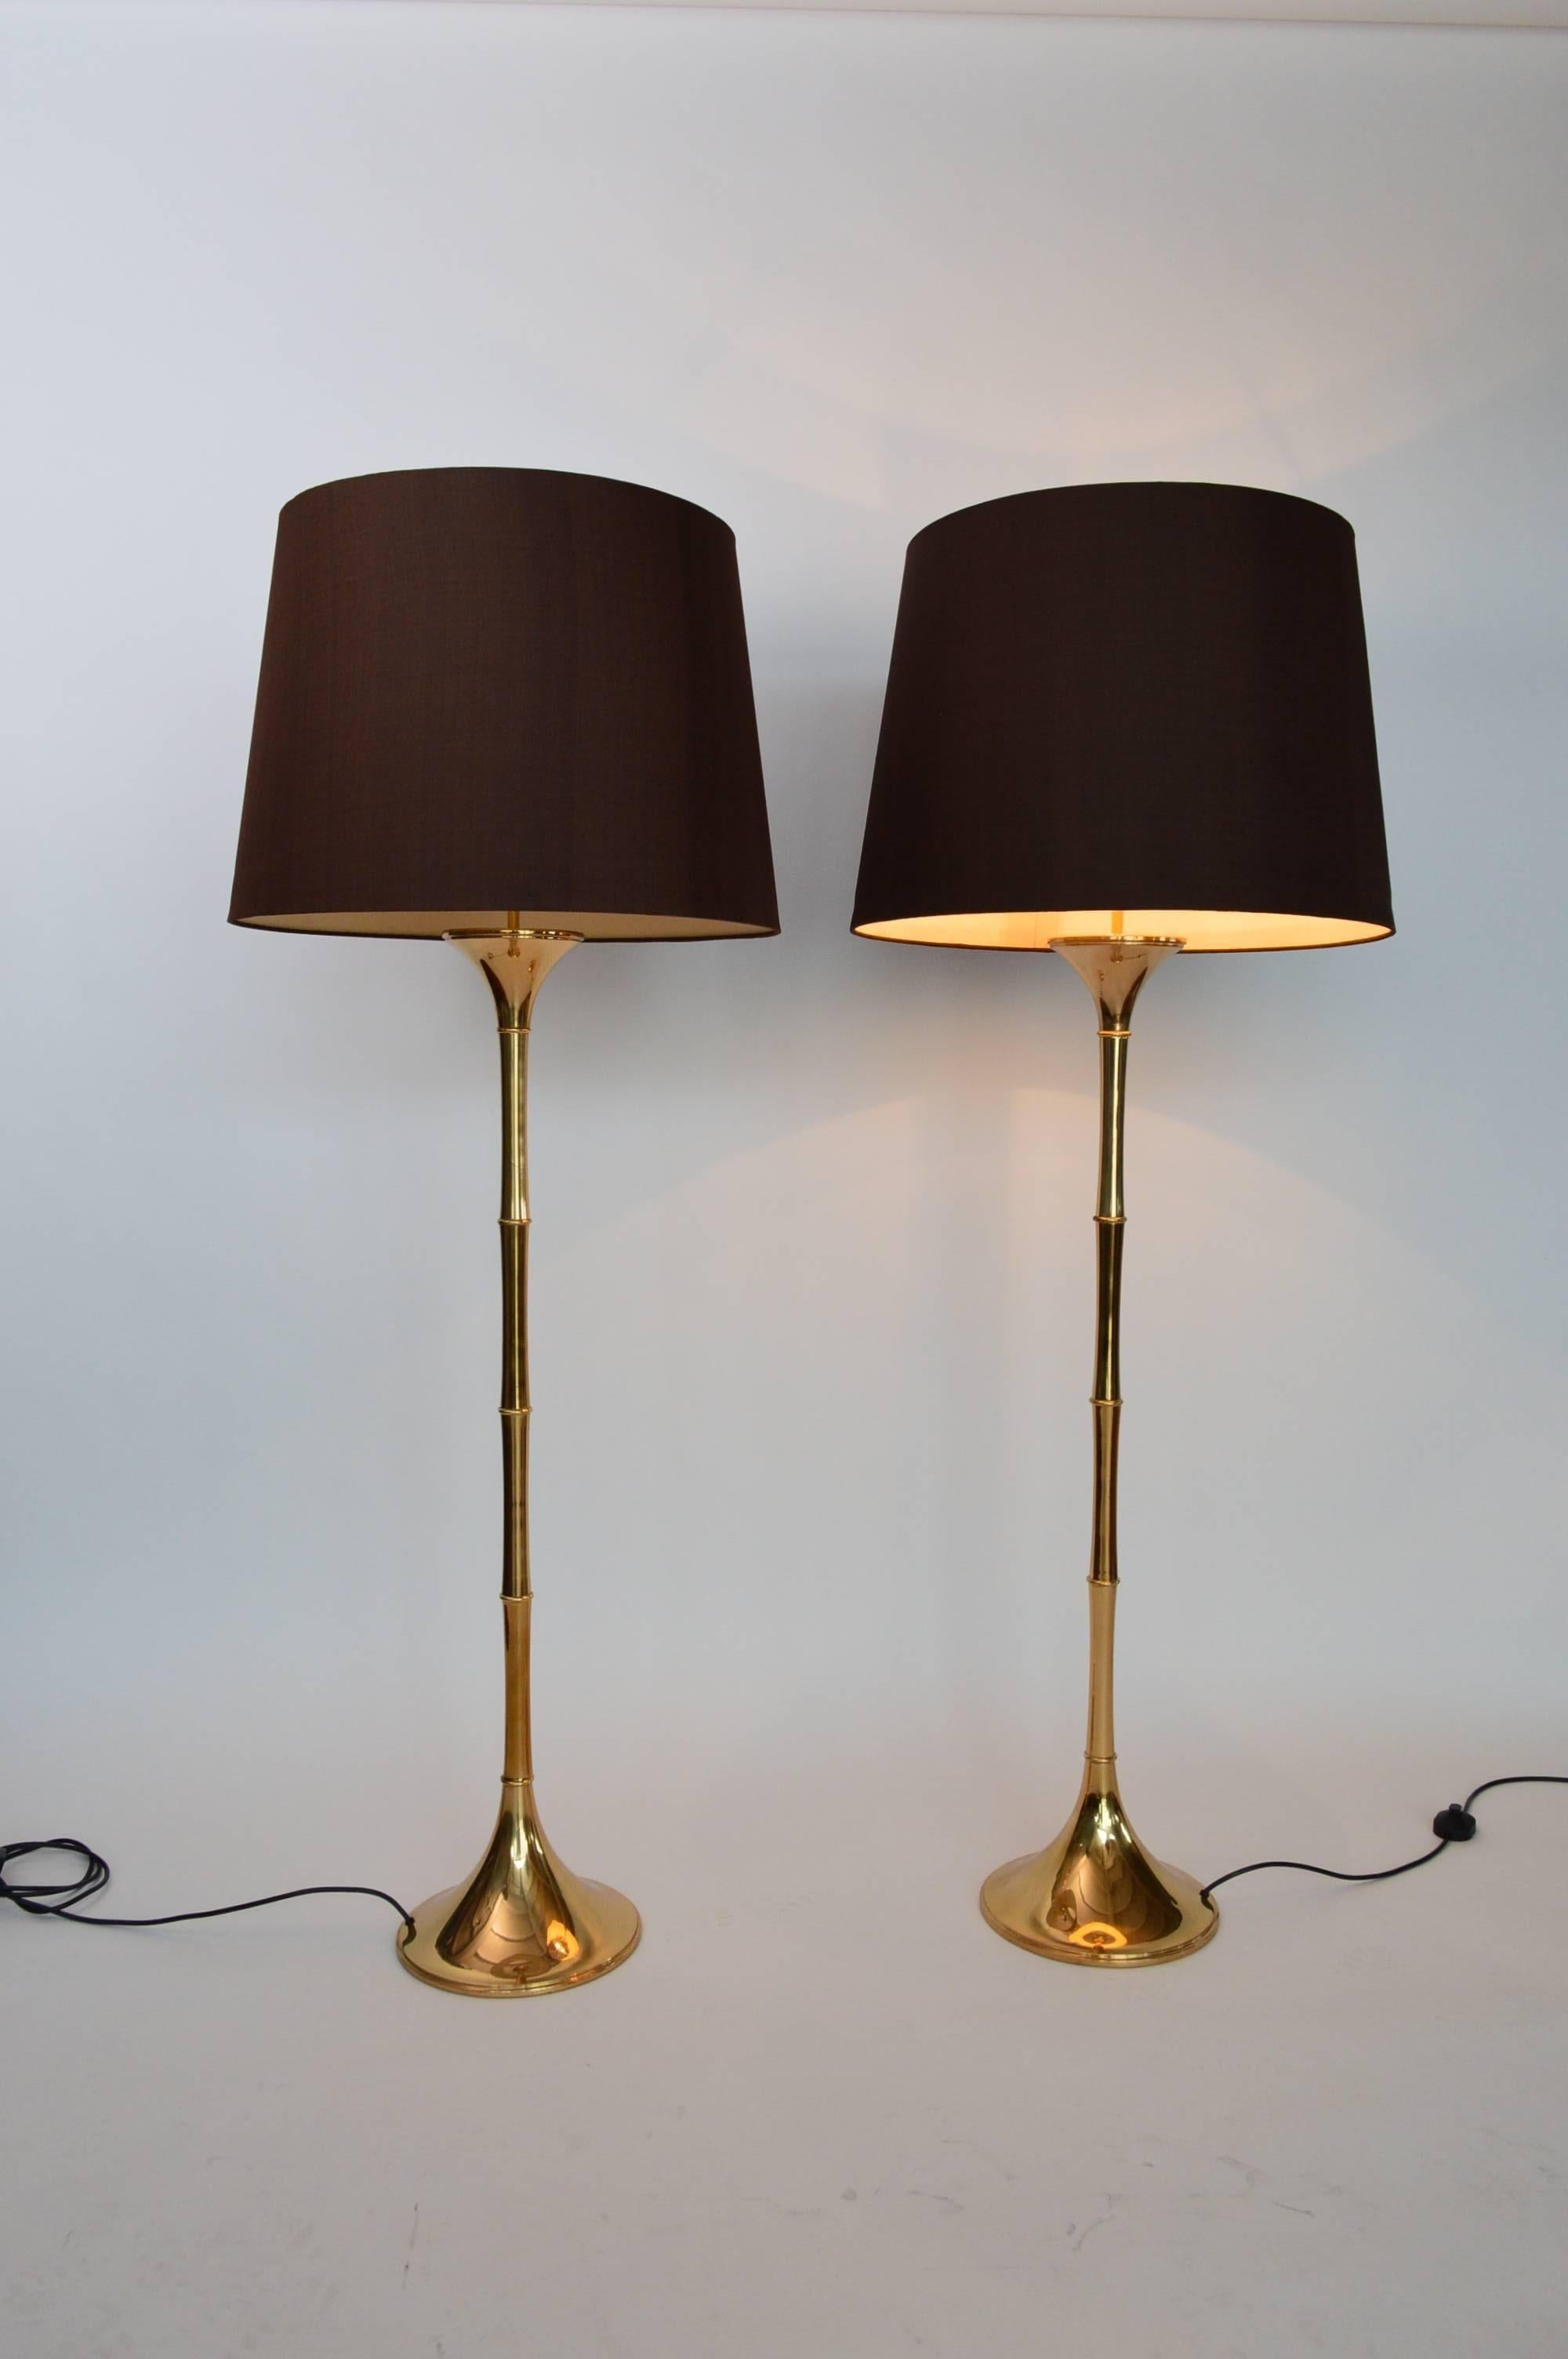 Amazing pair of floor lamps in bamboo optic made in shiny, dark brass with beautiful patina.
Designed from Ingo Maurer, manufactured from MDesign in the 1960s.
The lamps are equipped with original brown lamp-shade in silk and have small signs of